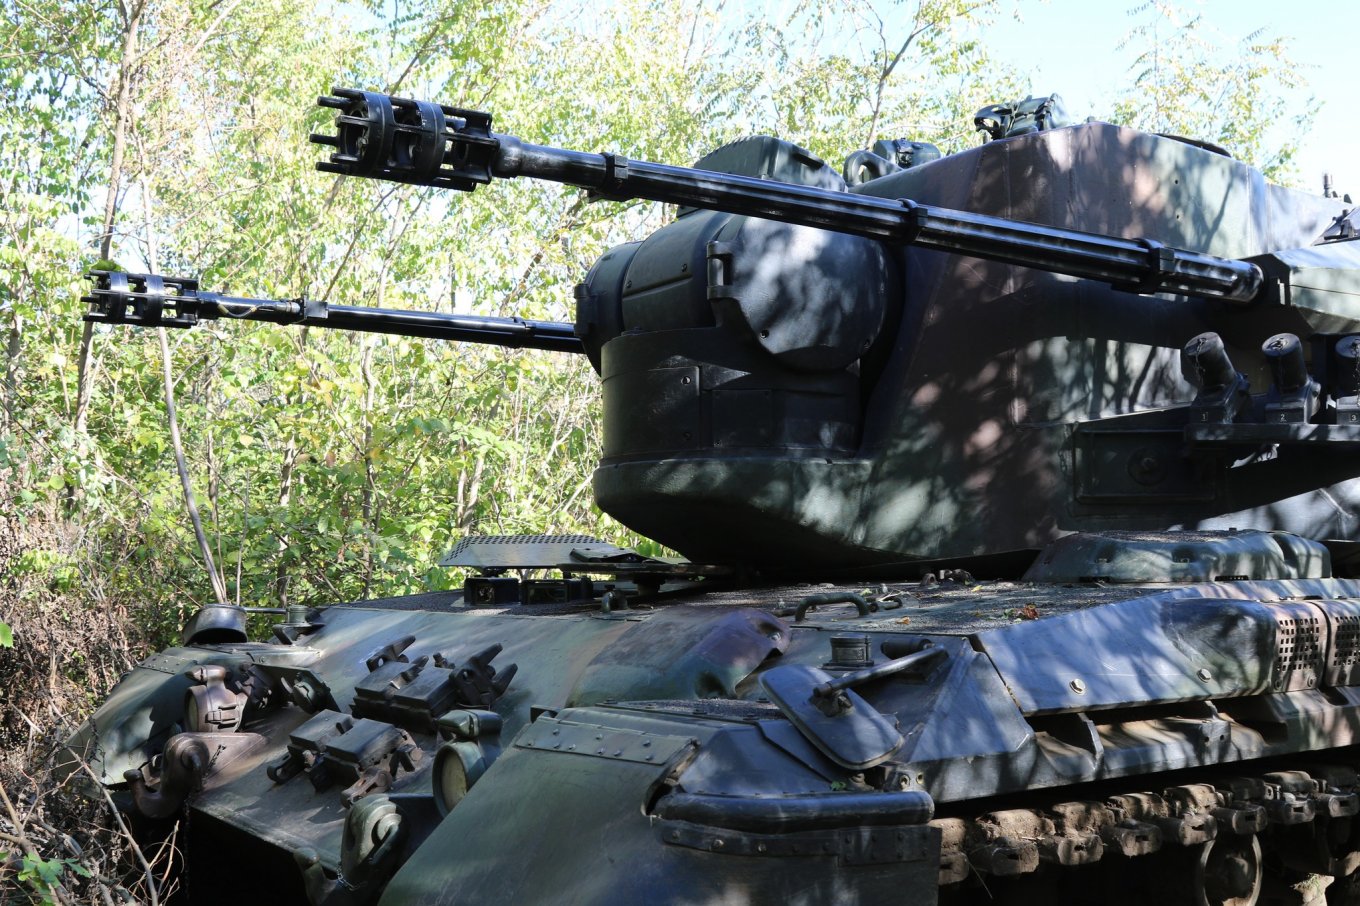 One of the German-donated Flakpanzer Gepard anti-aircraft self-propelled guns in Ukraine